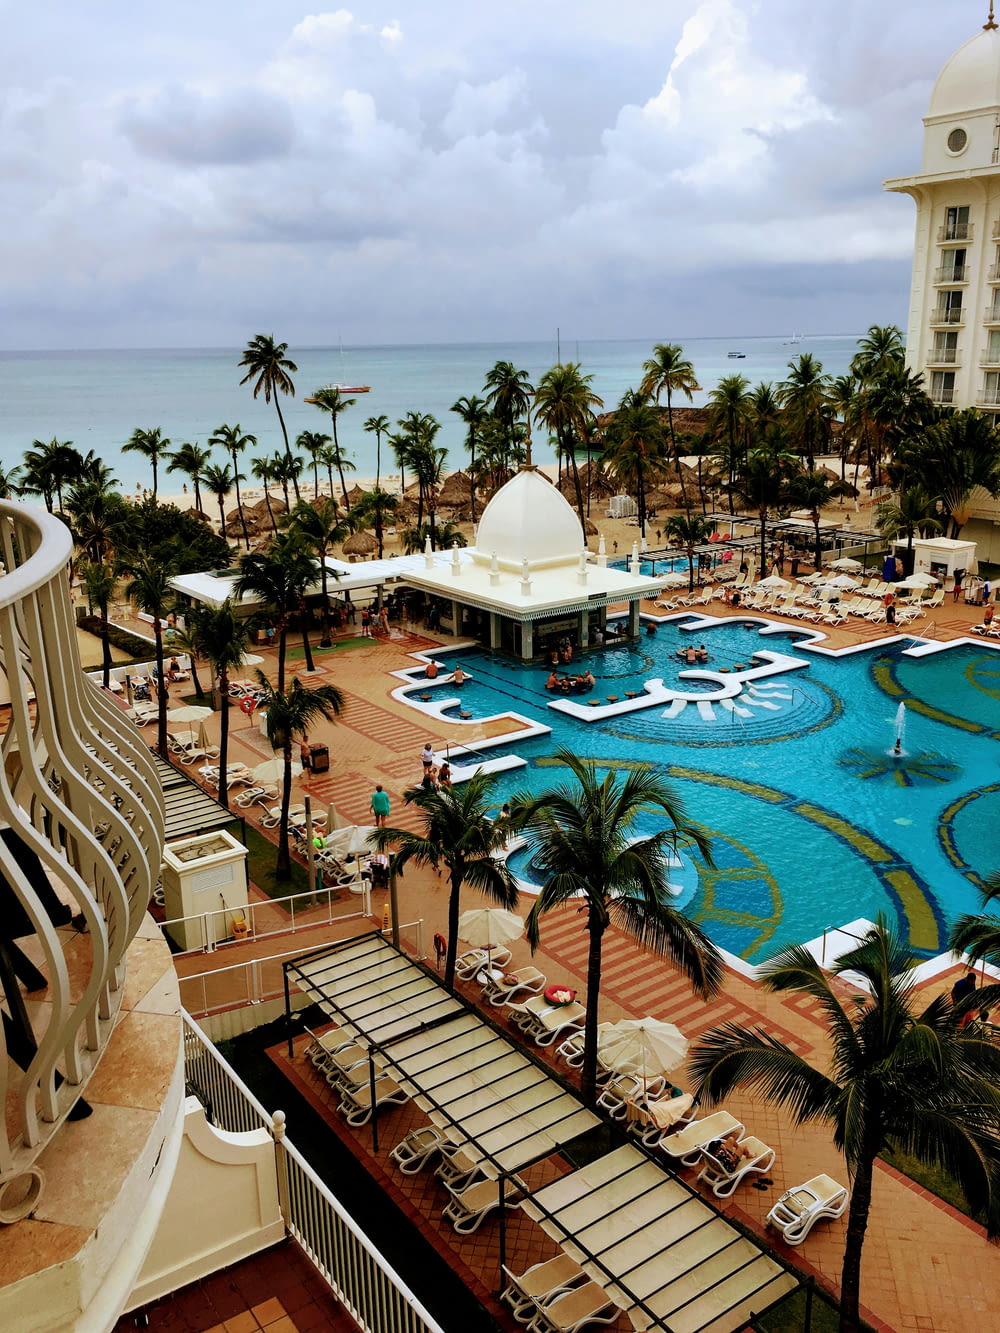 a view of a resort pool from a balcony